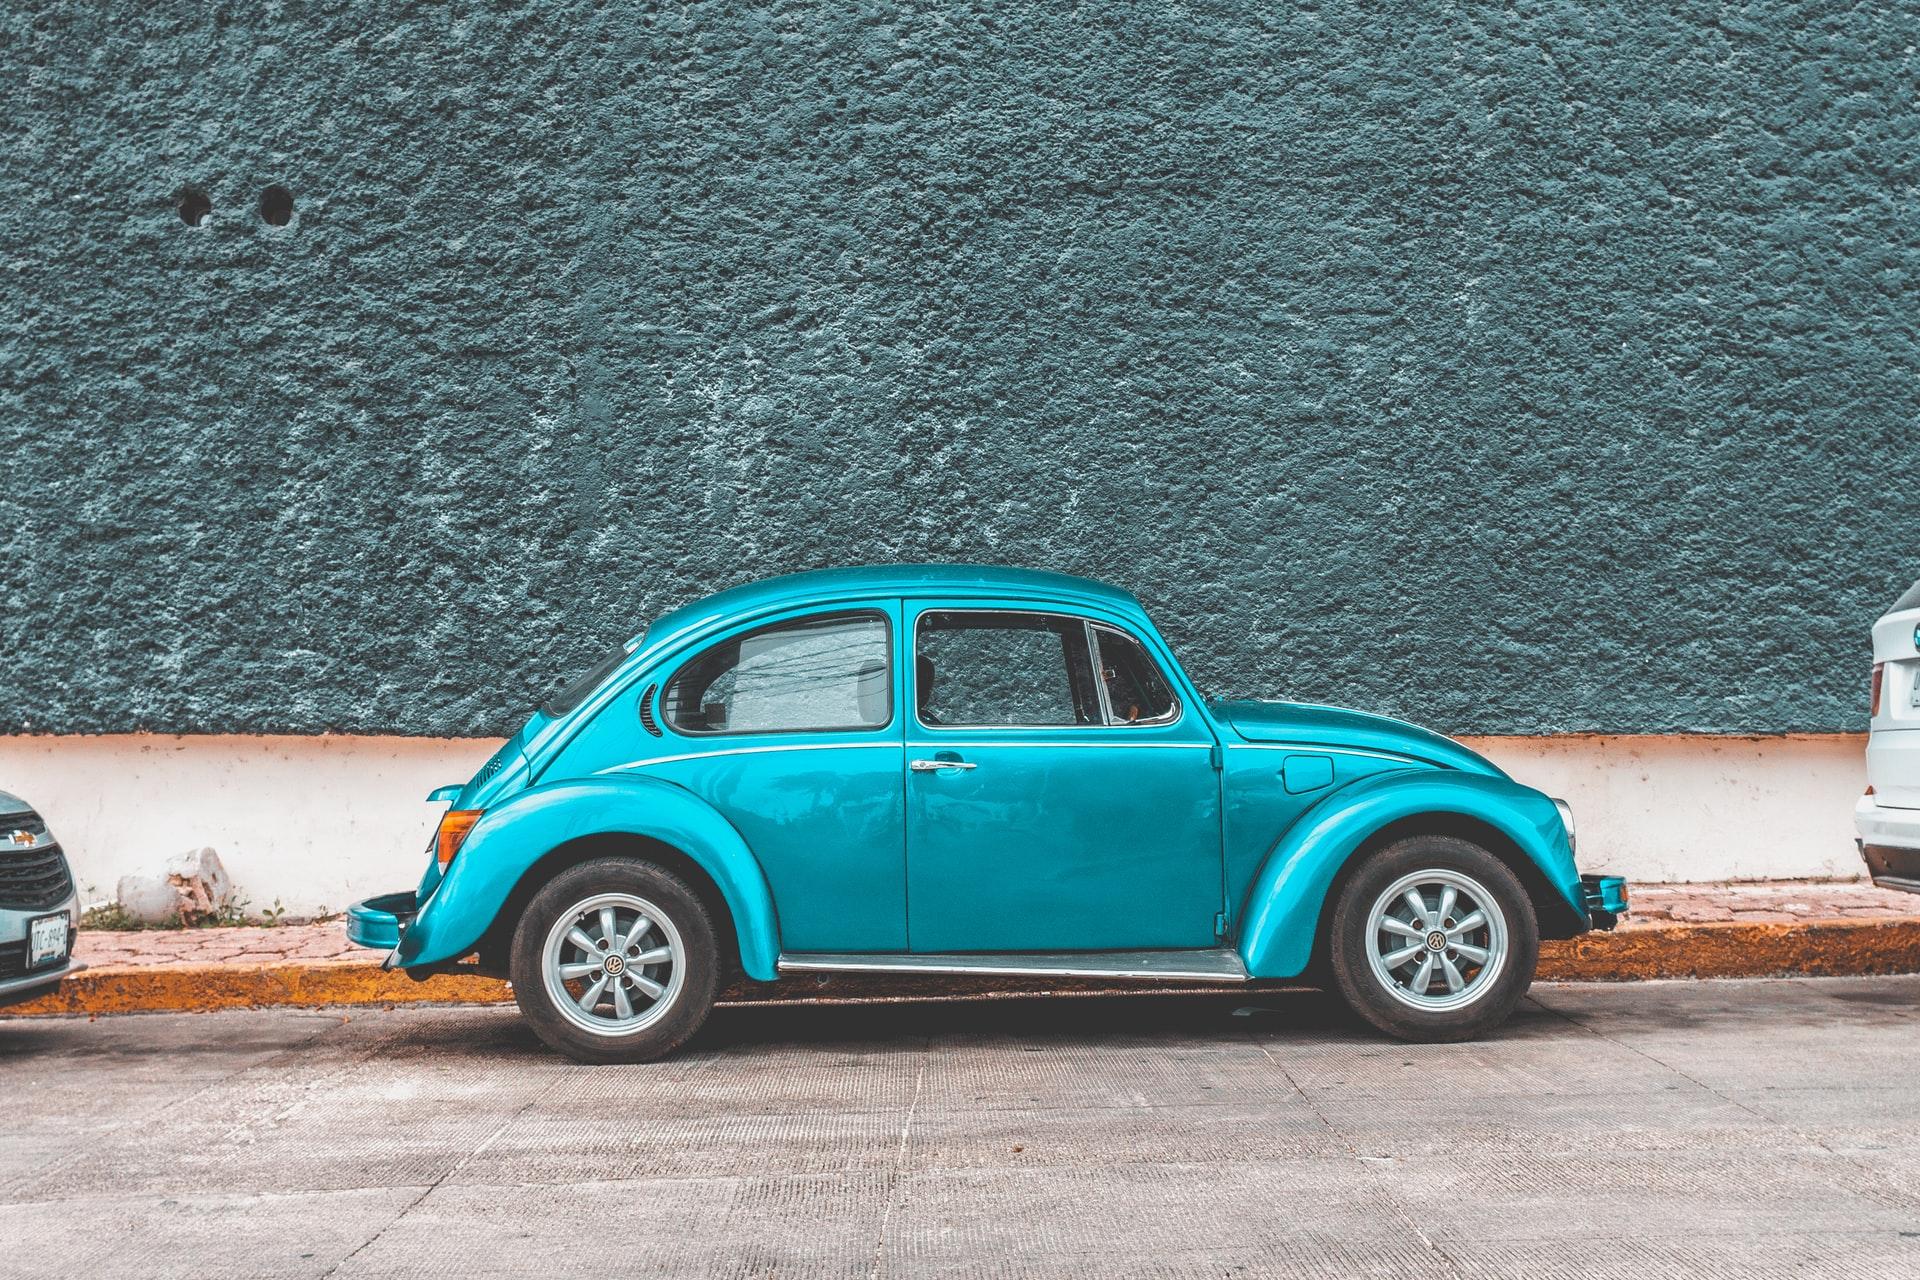 Will Volkswagen revive the iconic Beetle?